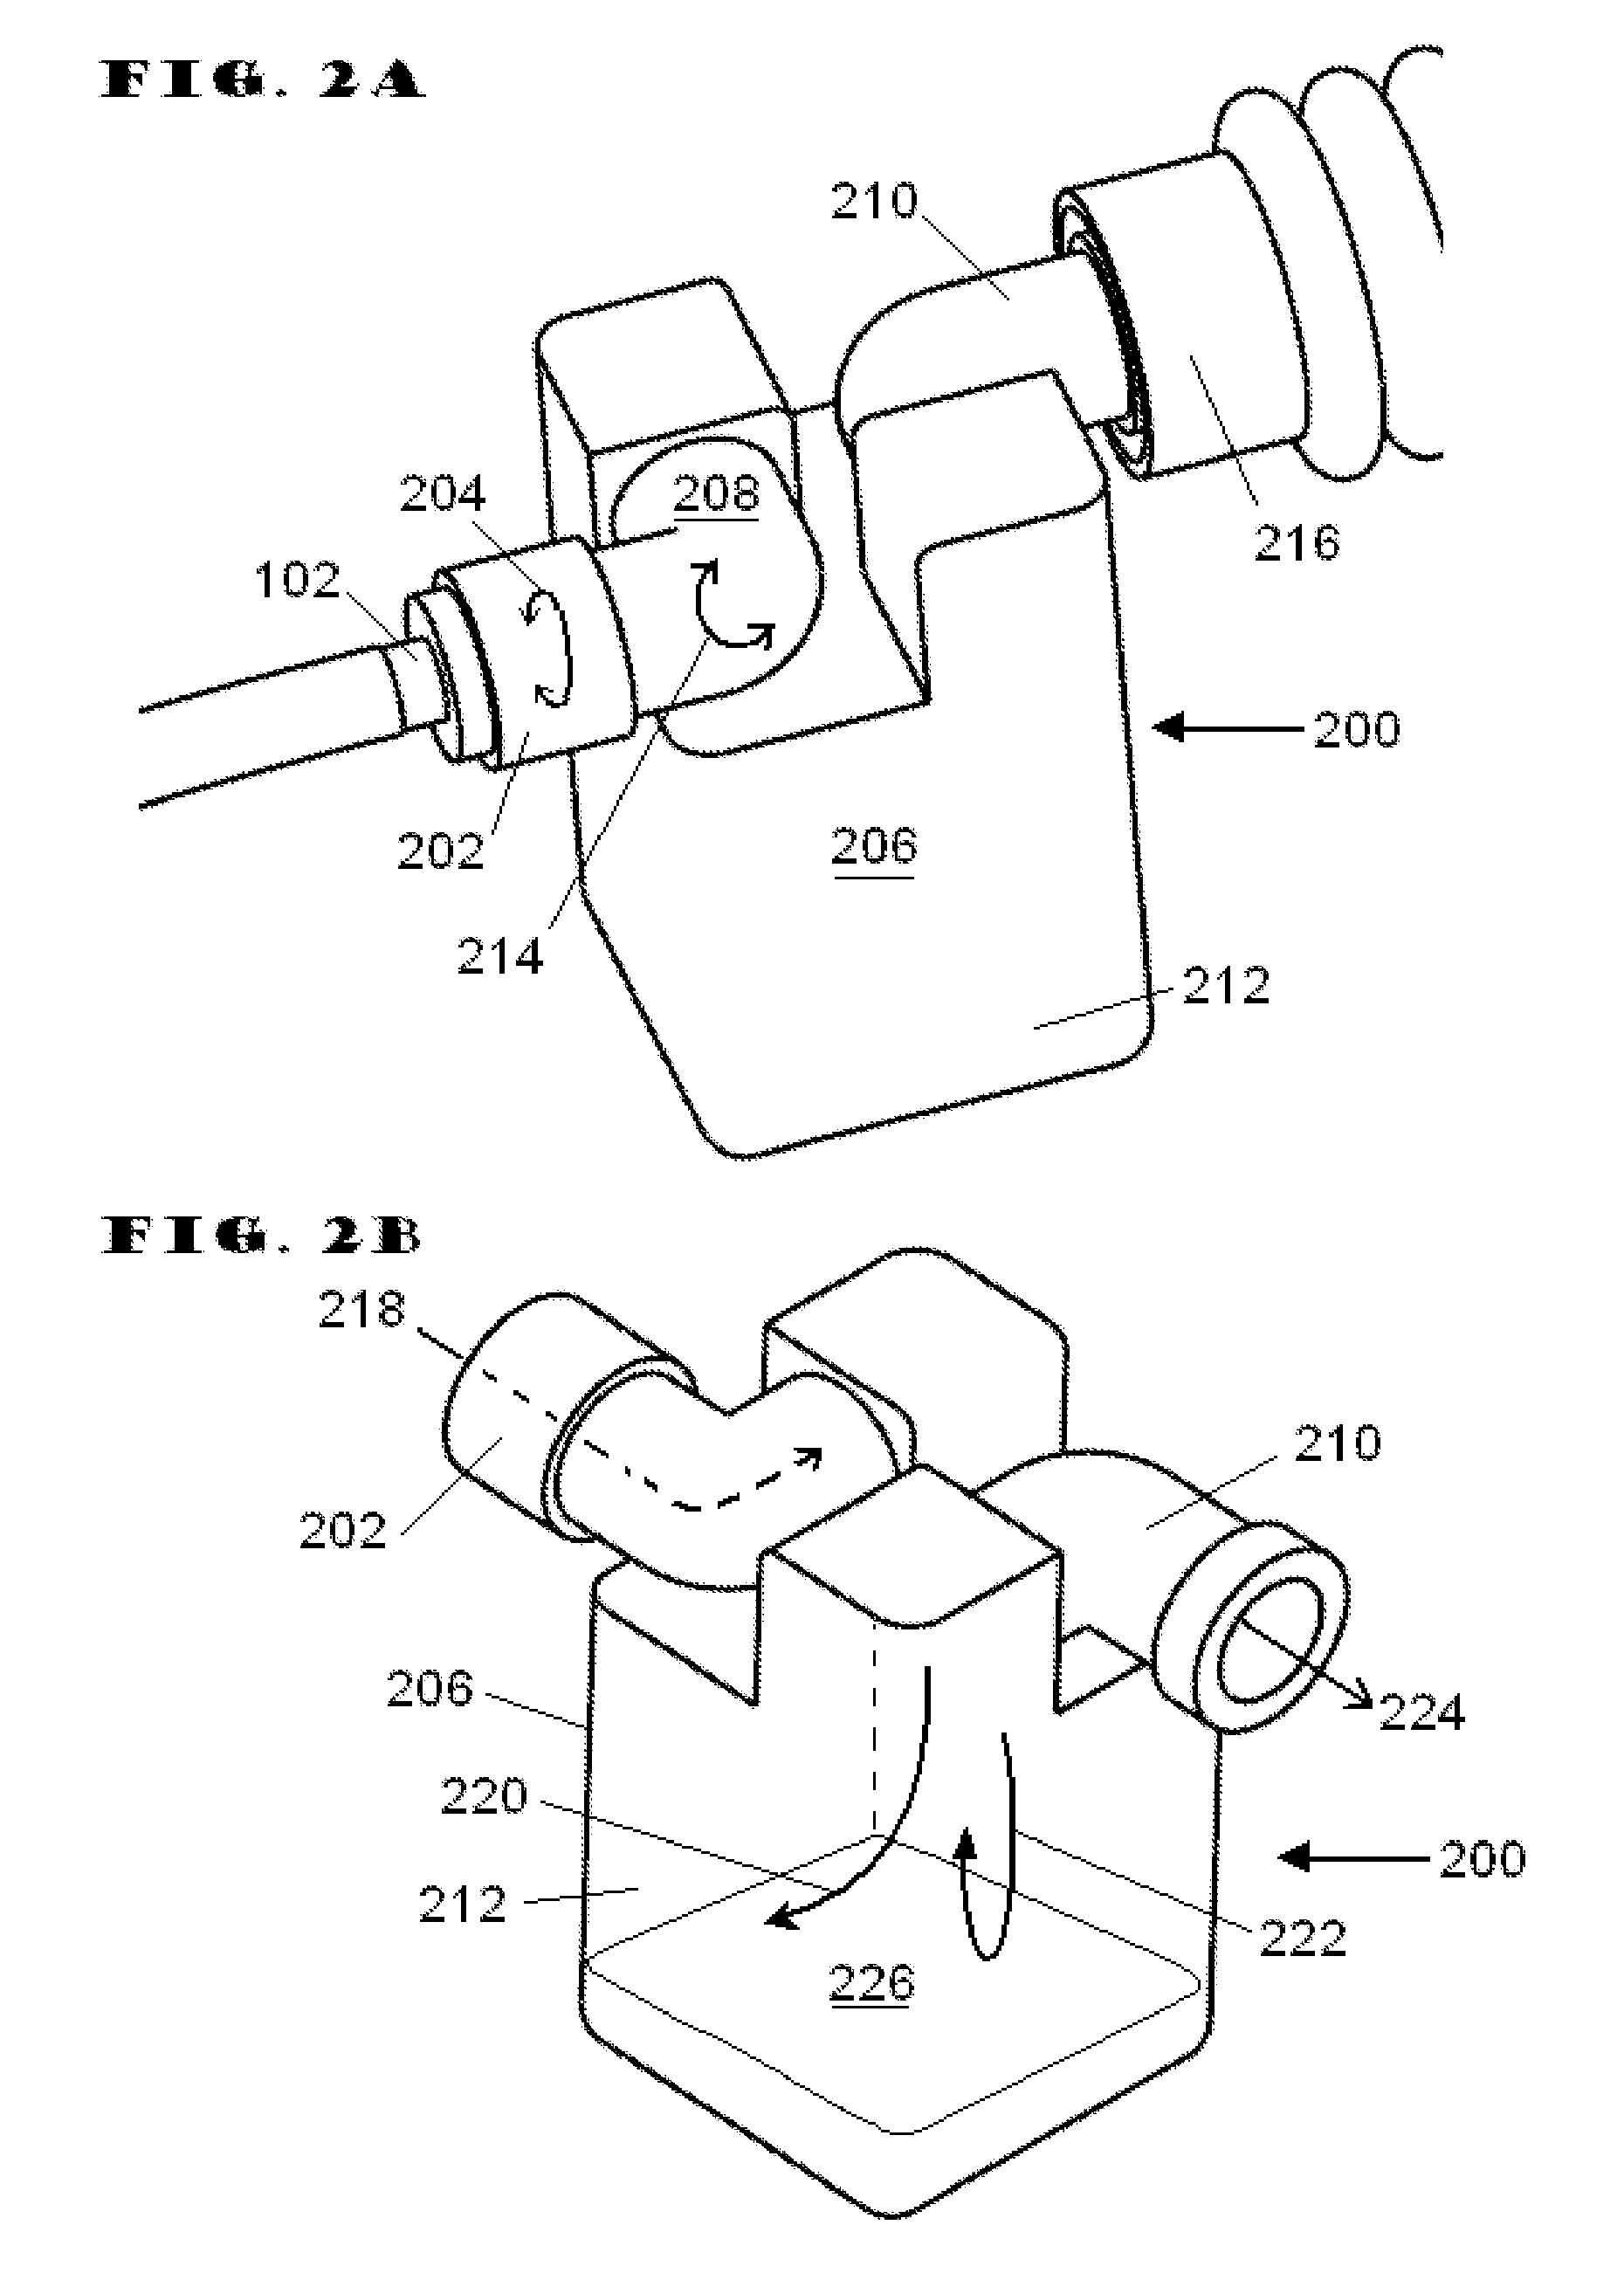 Respiratory secretion rentention device, system and method